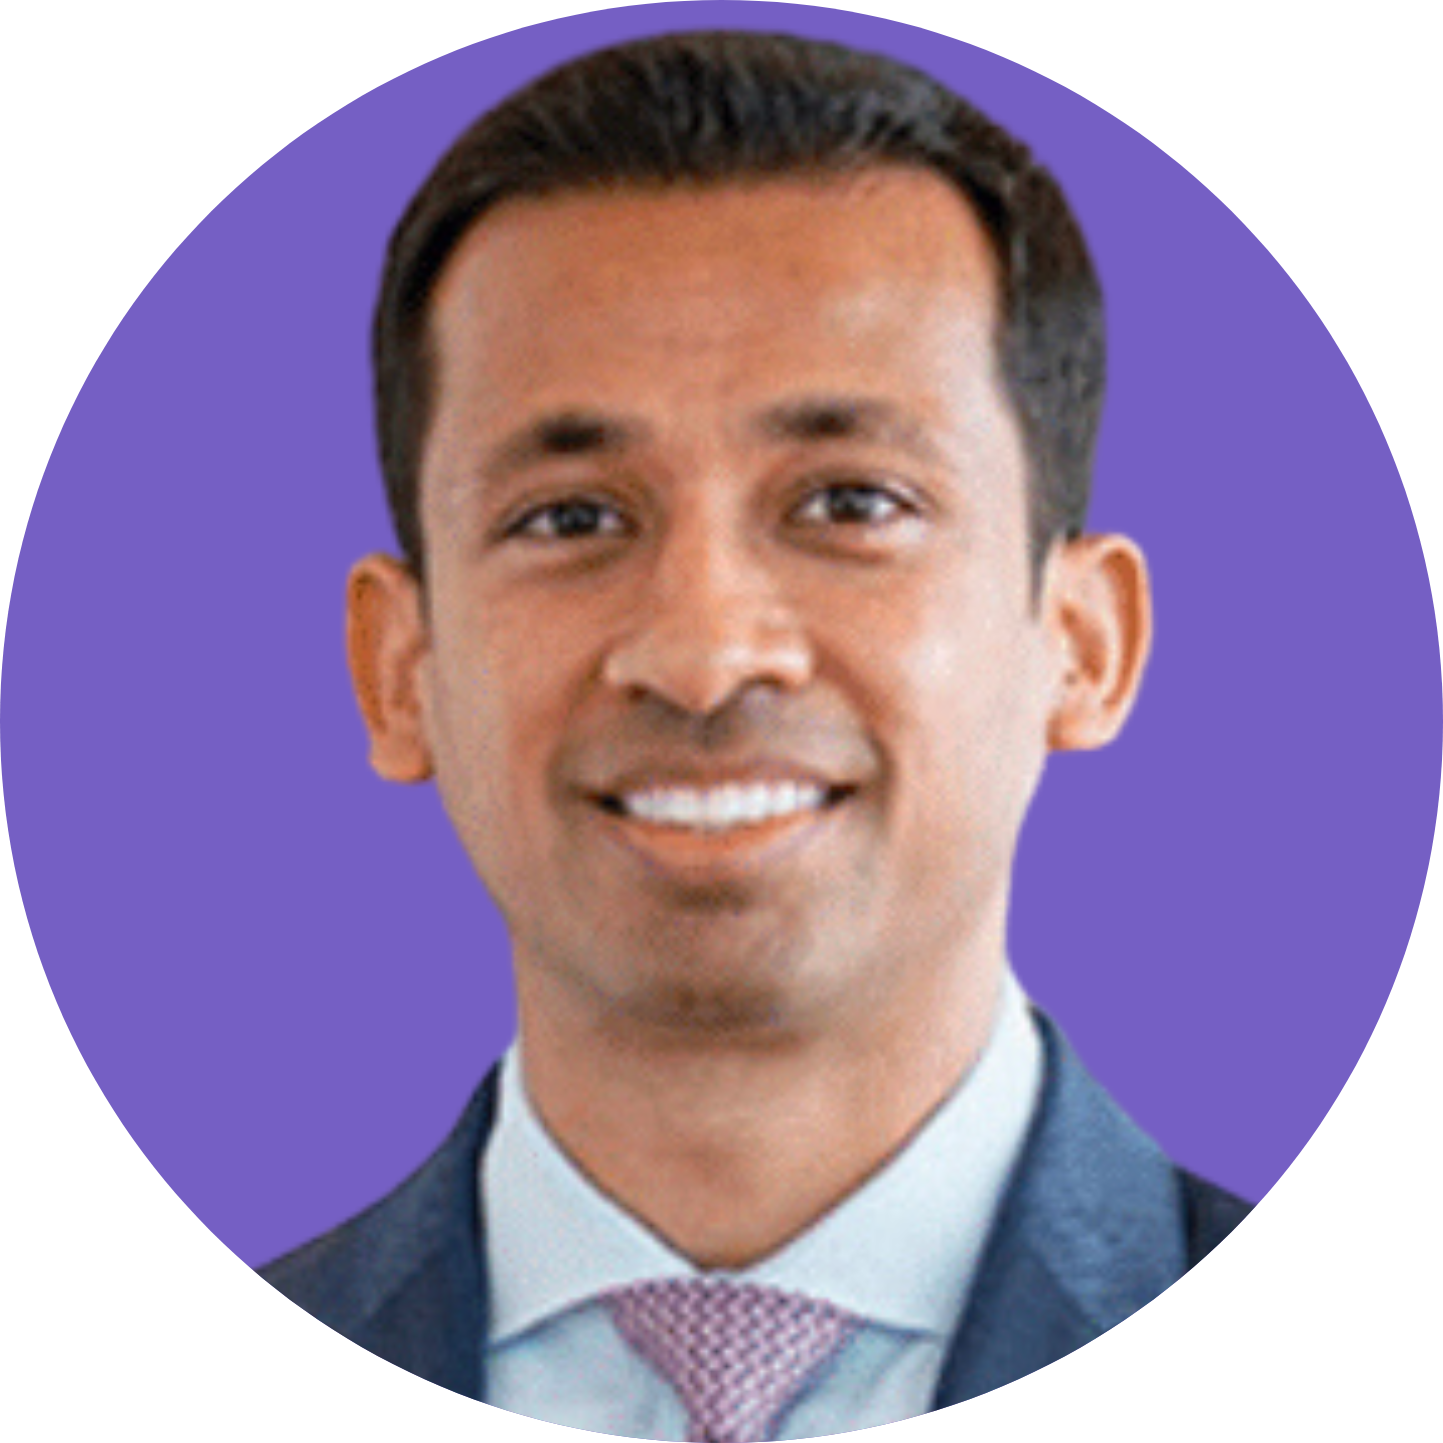 Anmol Sinha - Fixed Income Investment Director, Capital Group